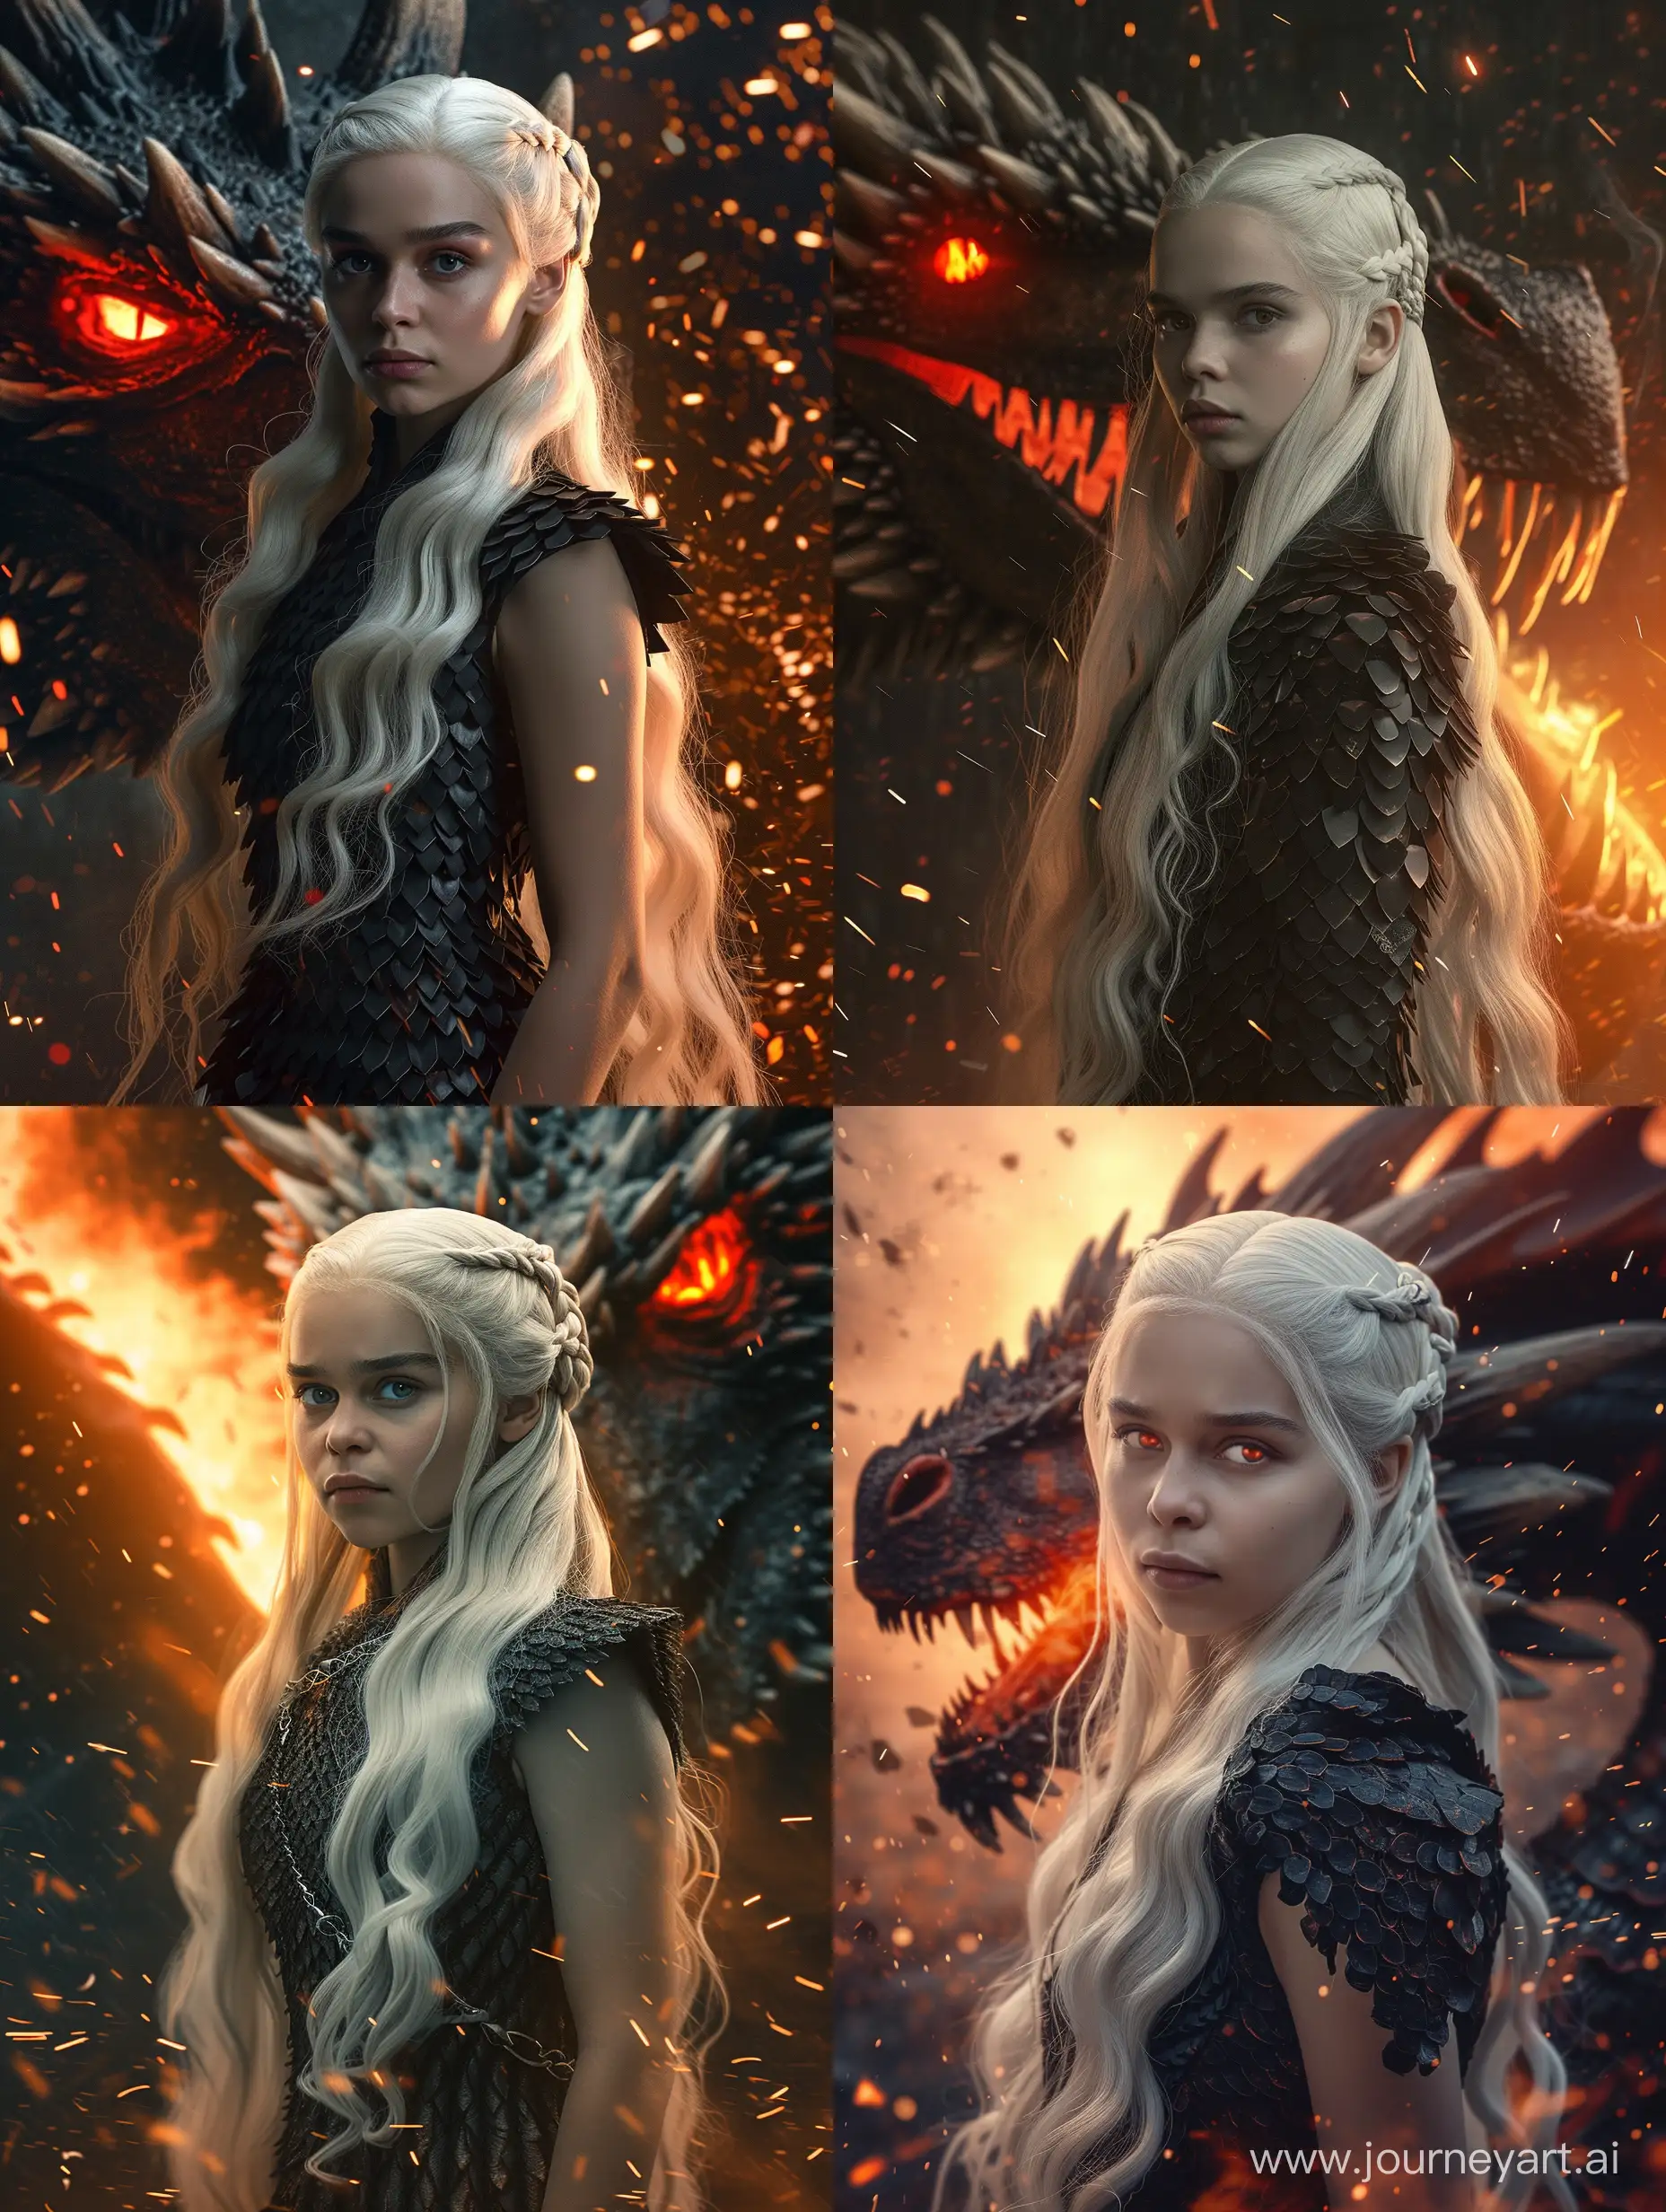 Actress Mia Goth as a Targaryen girl, she has long white hair, a confident look, she is wearing a black dress made of dragon scales, behind her is the head of a dragon with red eyes burning, Game of Thrones style, orange light, sparks of flame, cinematography, realism